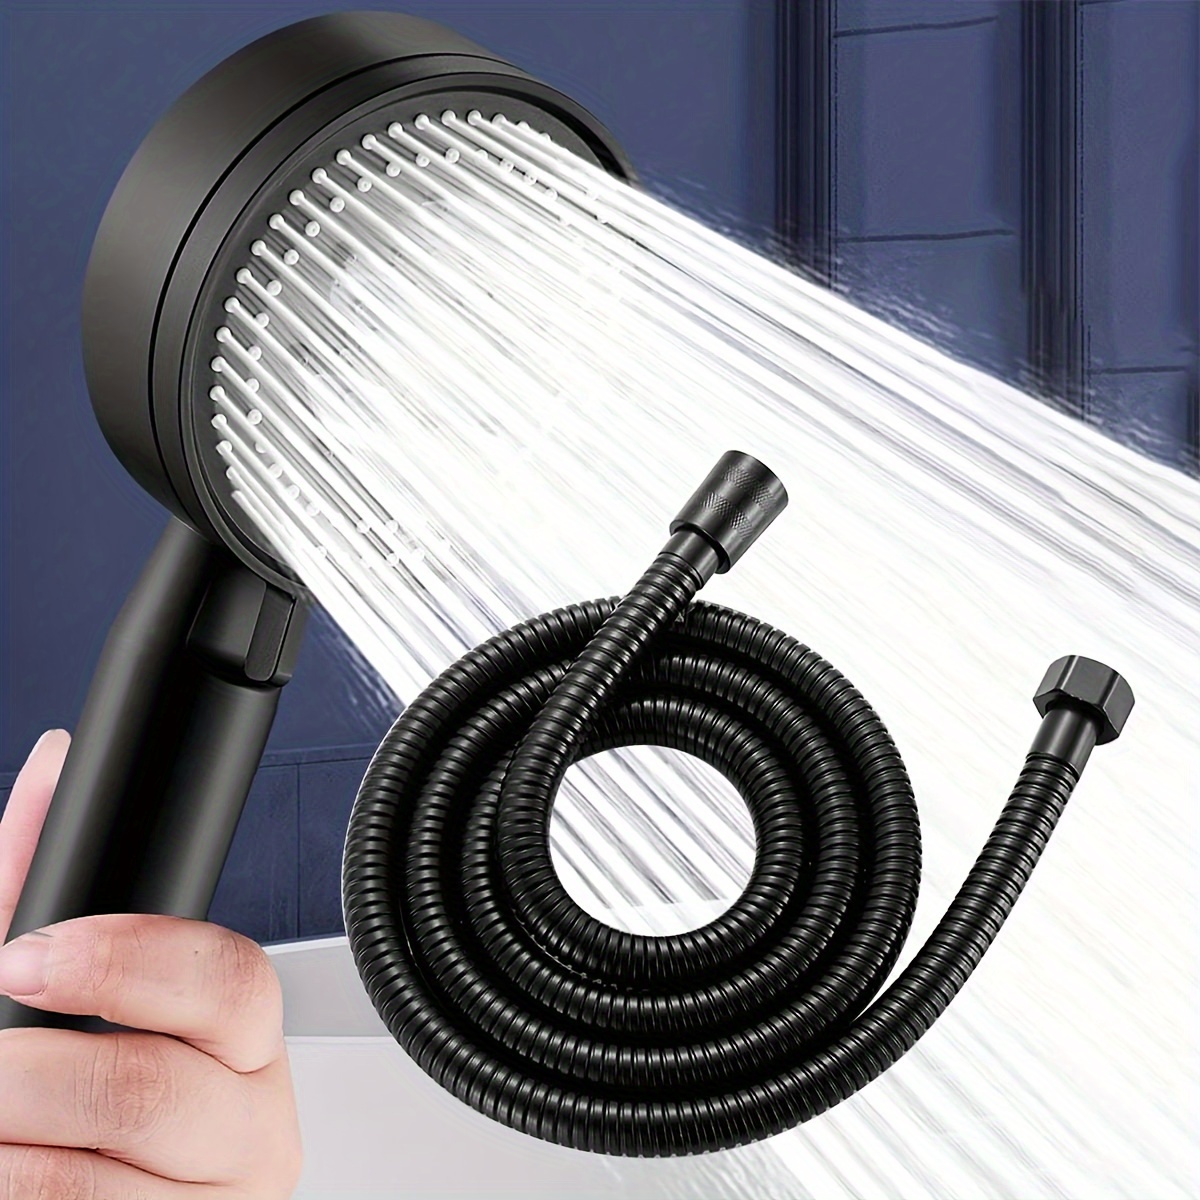 

High-pressure Handheld Shower Head With 5 Spray Modes - Easy Install, Contemporary Design, Durable Plastic